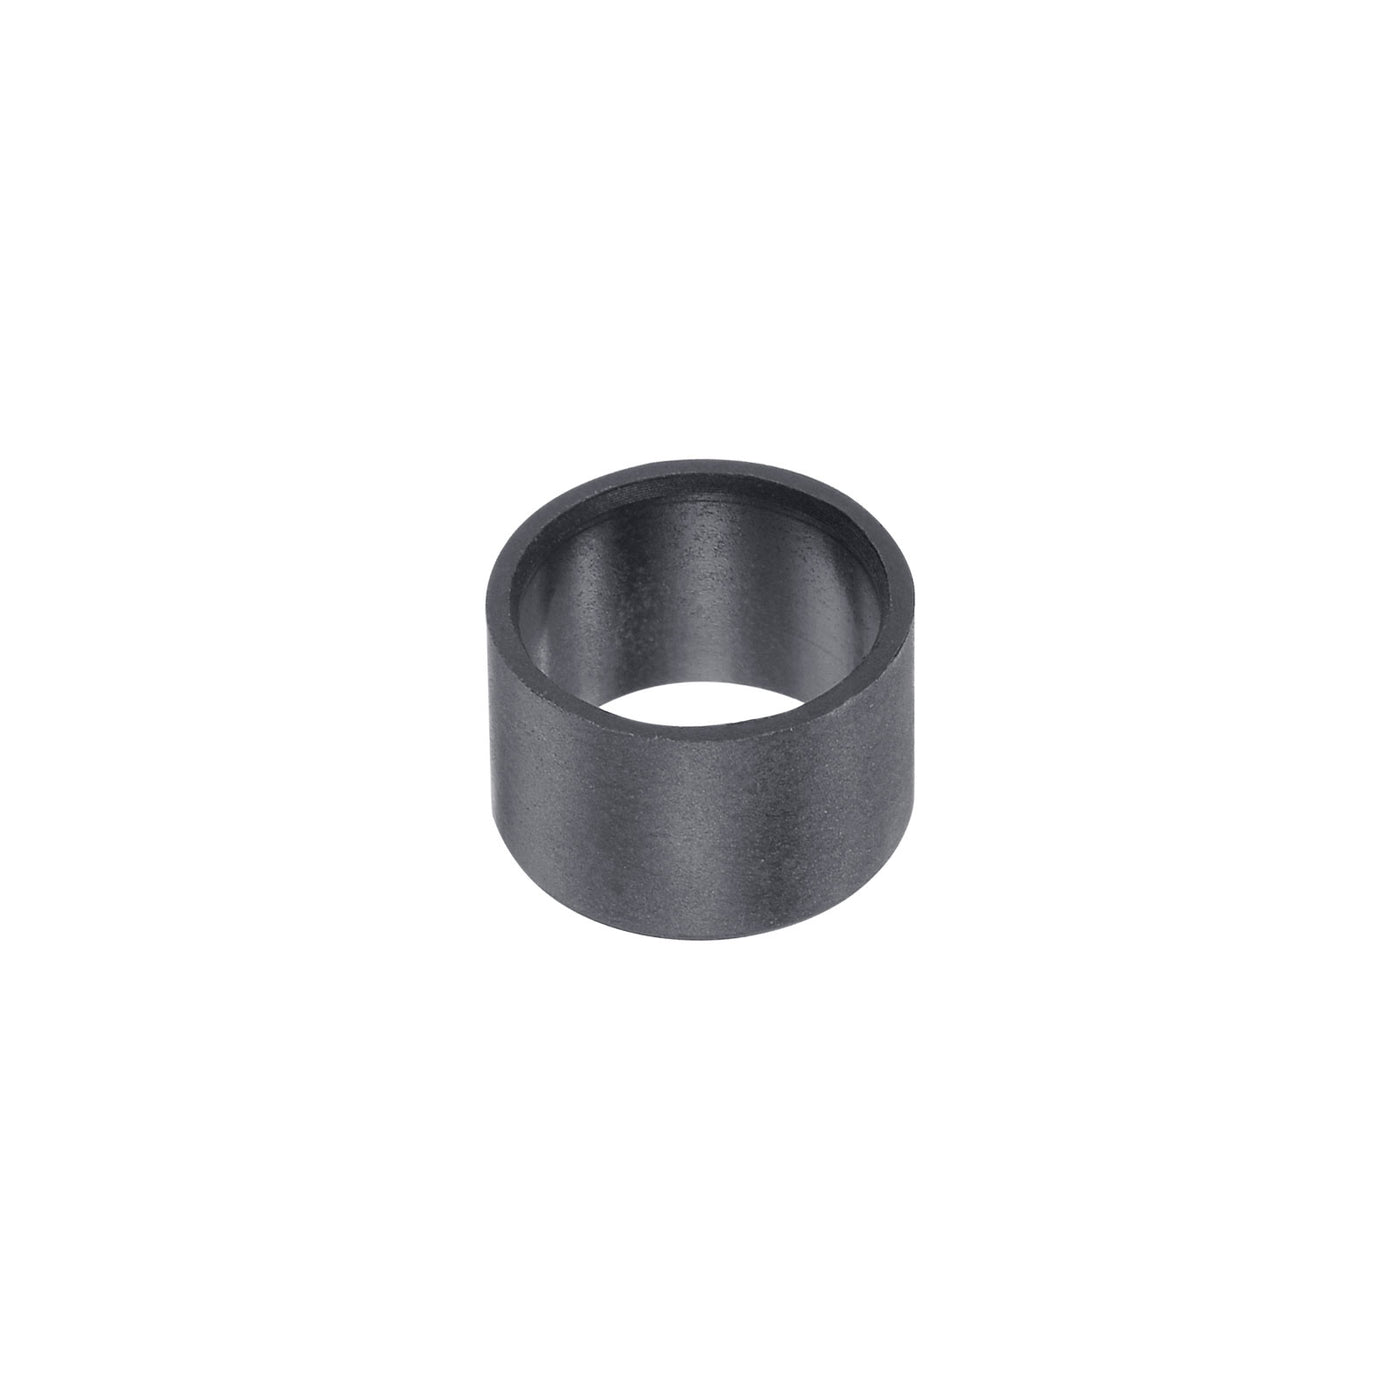 uxcell Uxcell Sleeve Bearings 10mmx12mmx8mm POM Wrapped Oilless Bushings Black